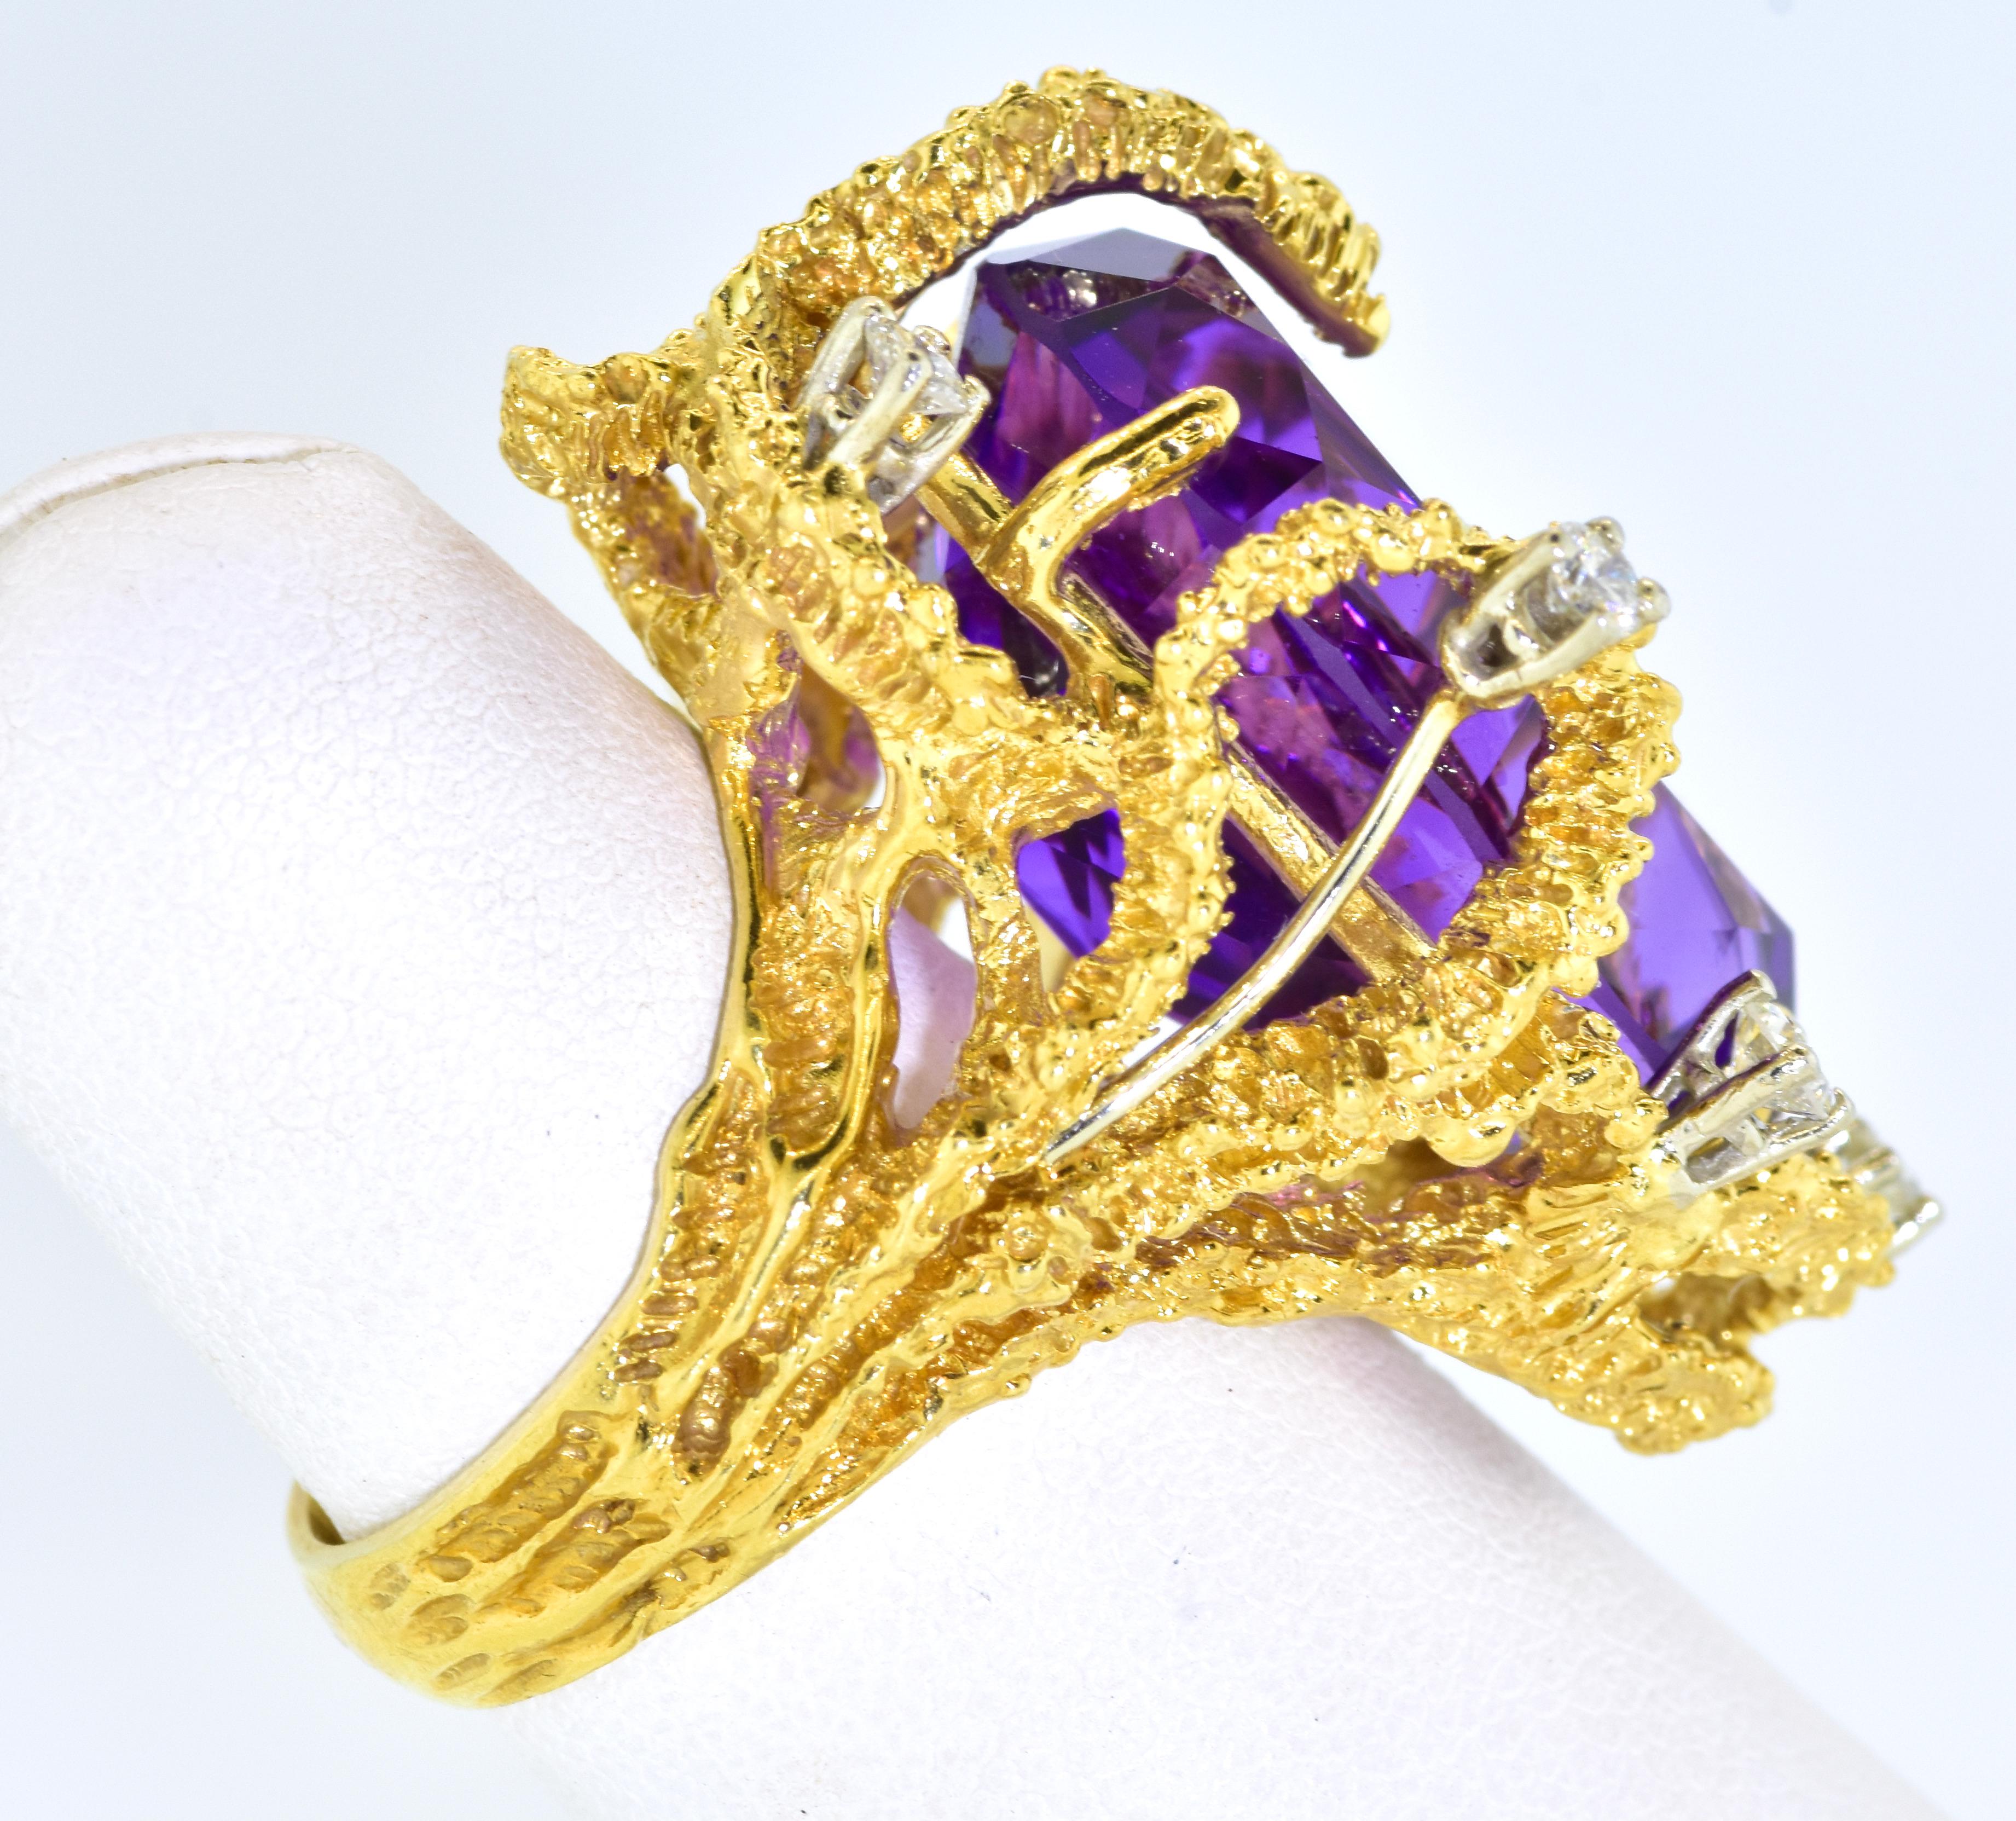 Modernist Brutalist Amethyst, Diamond and 18k Yellow Gold Ring, circa 1960 In Excellent Condition For Sale In Aspen, CO